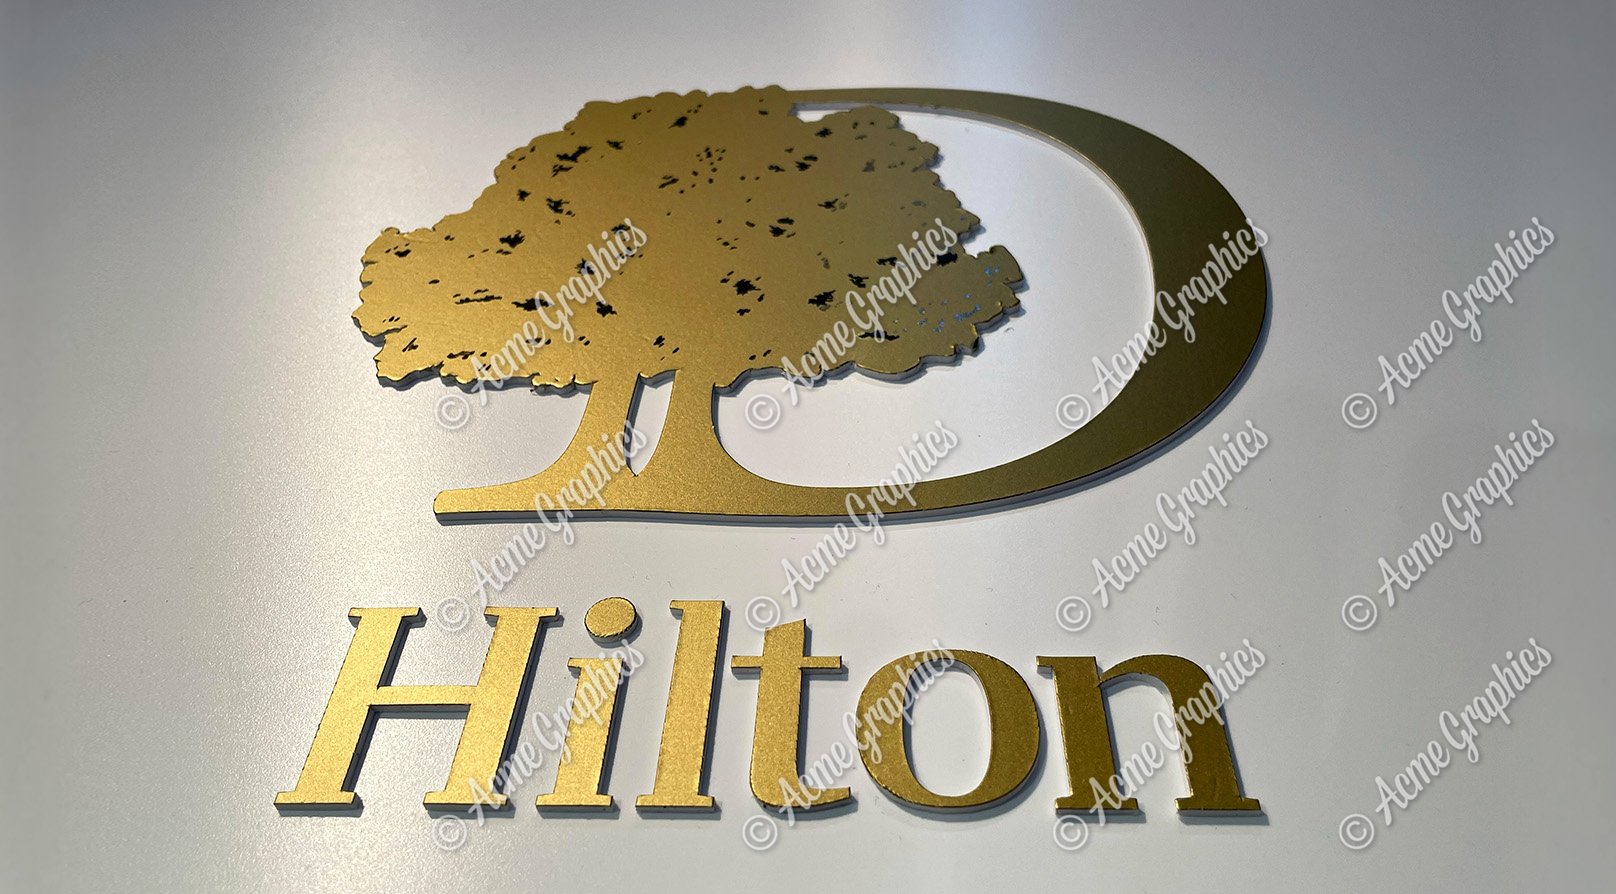 Hilton Hotel sign cut out letters and logo